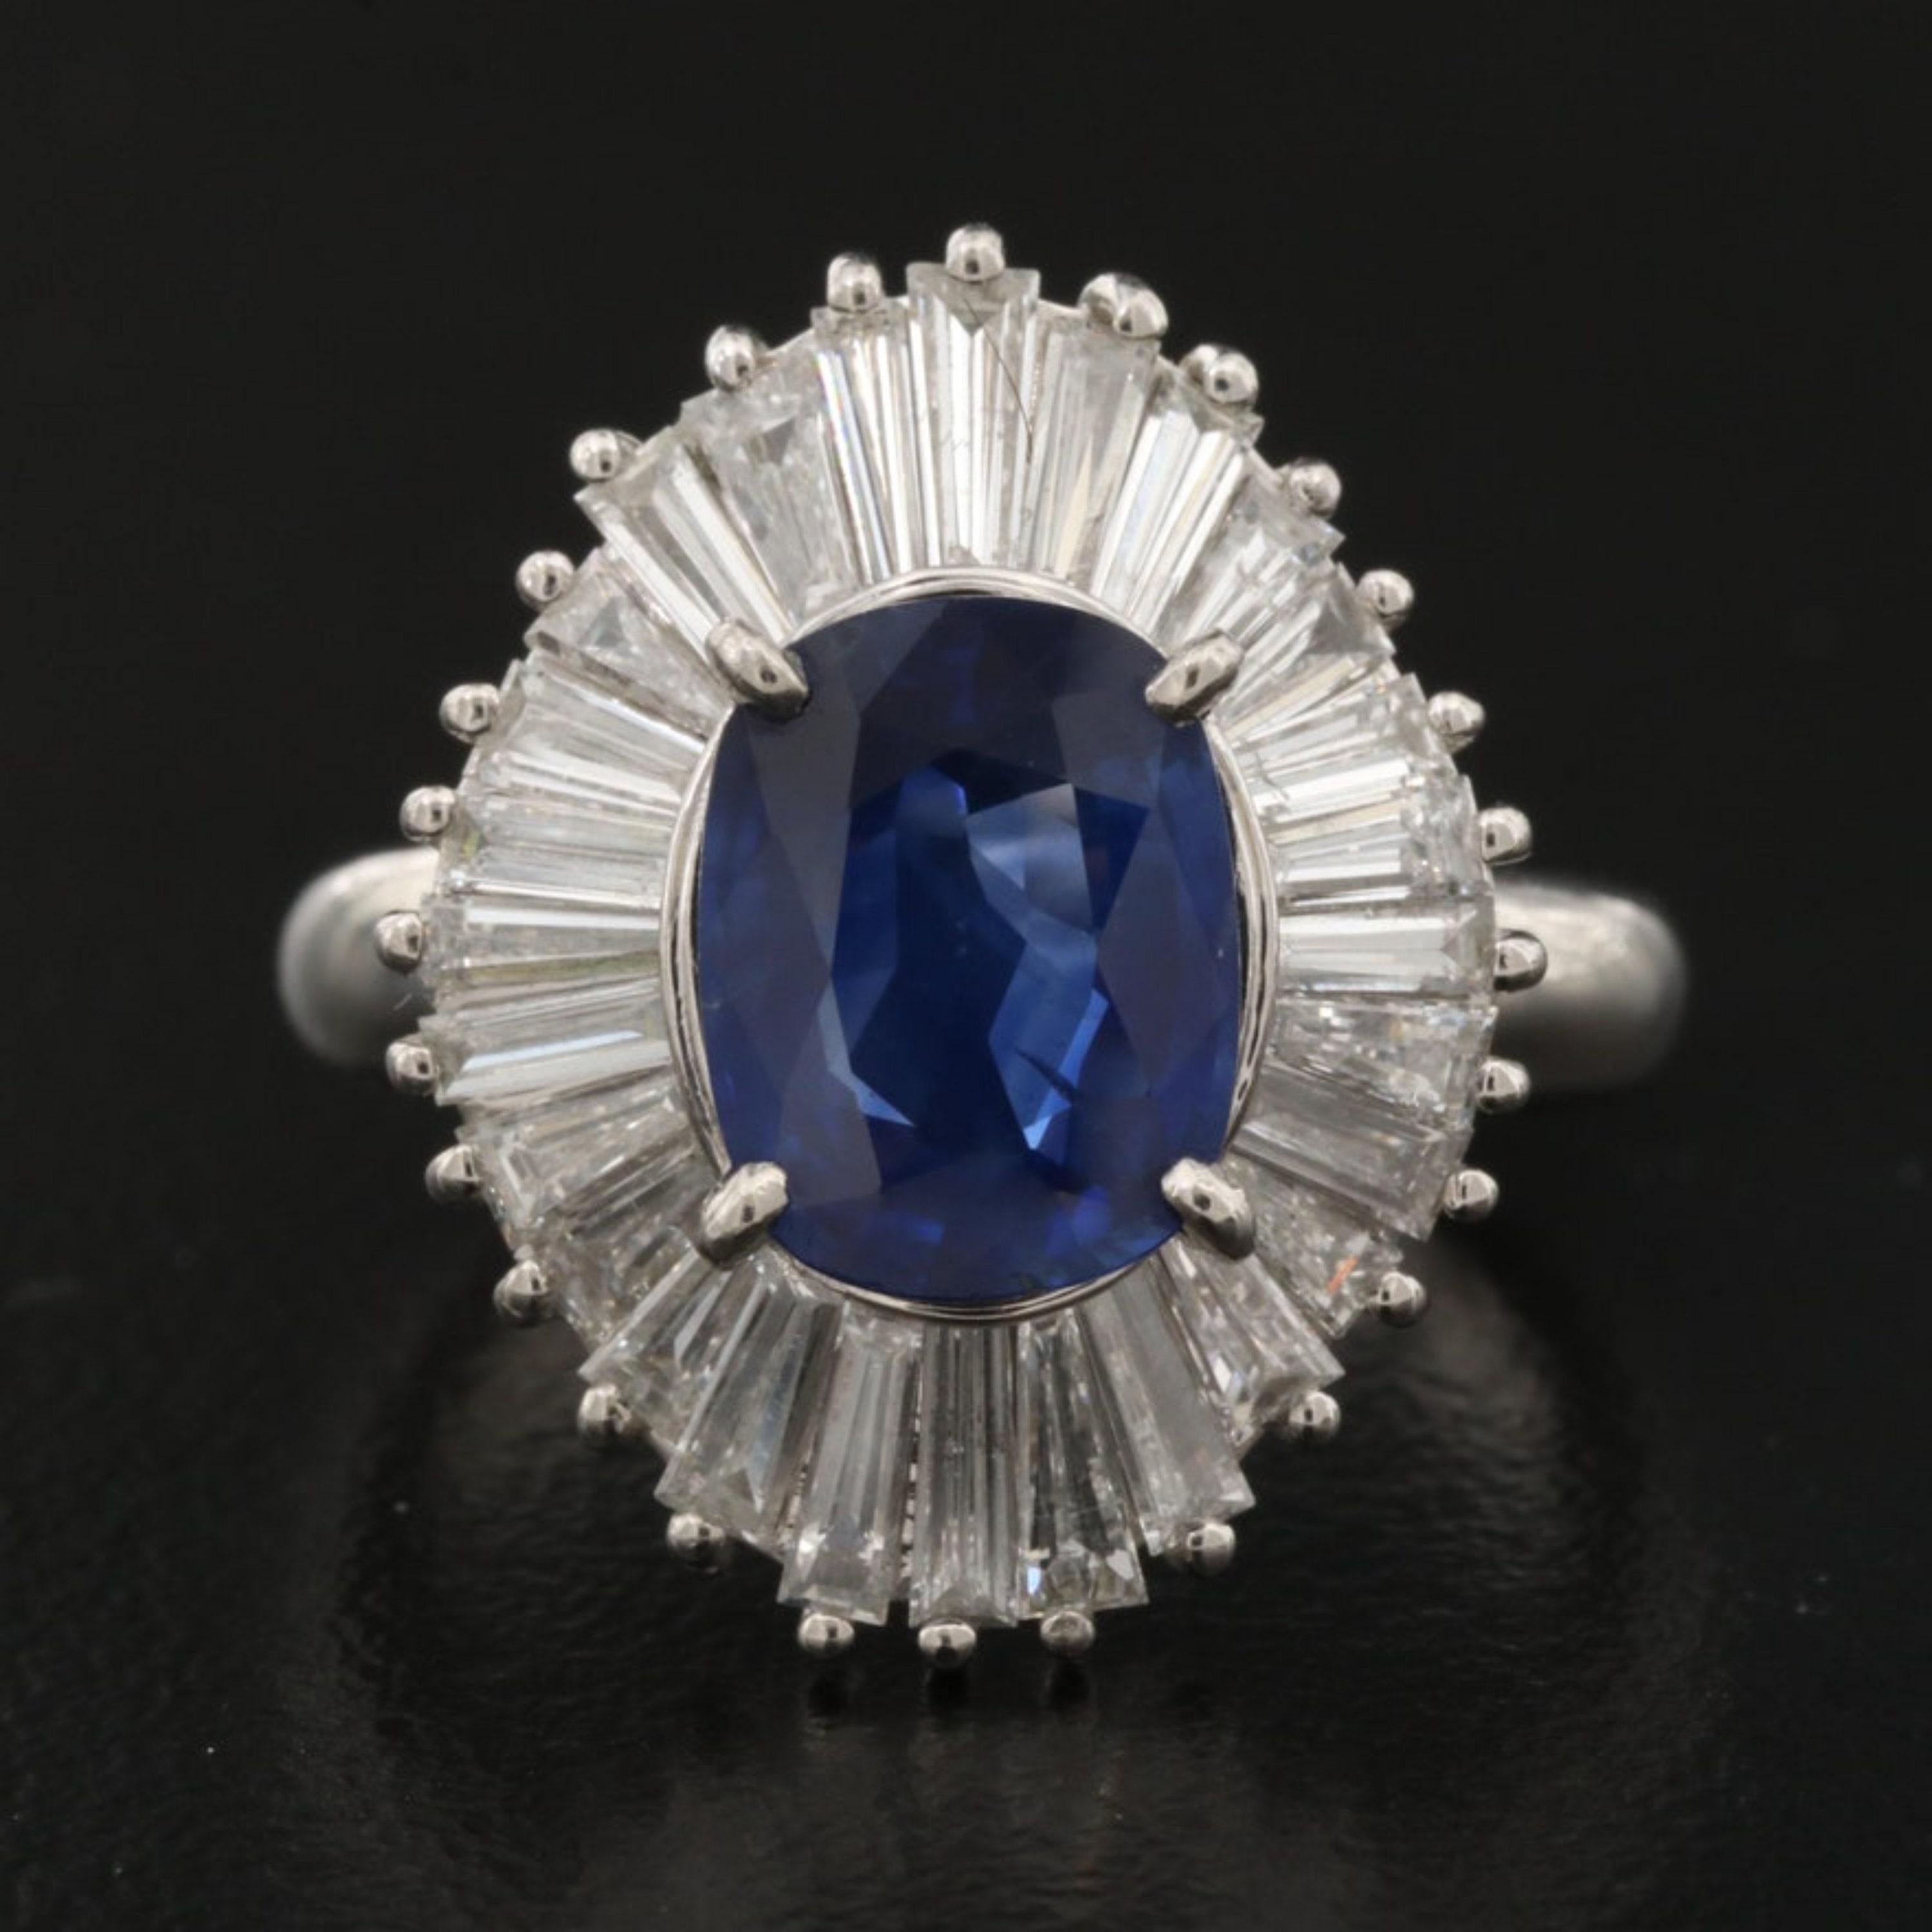 For Sale:  2 Carat Vintage Sapphire Engagement Ring, Halo Sapphire Diamond Cocktail Ring 6